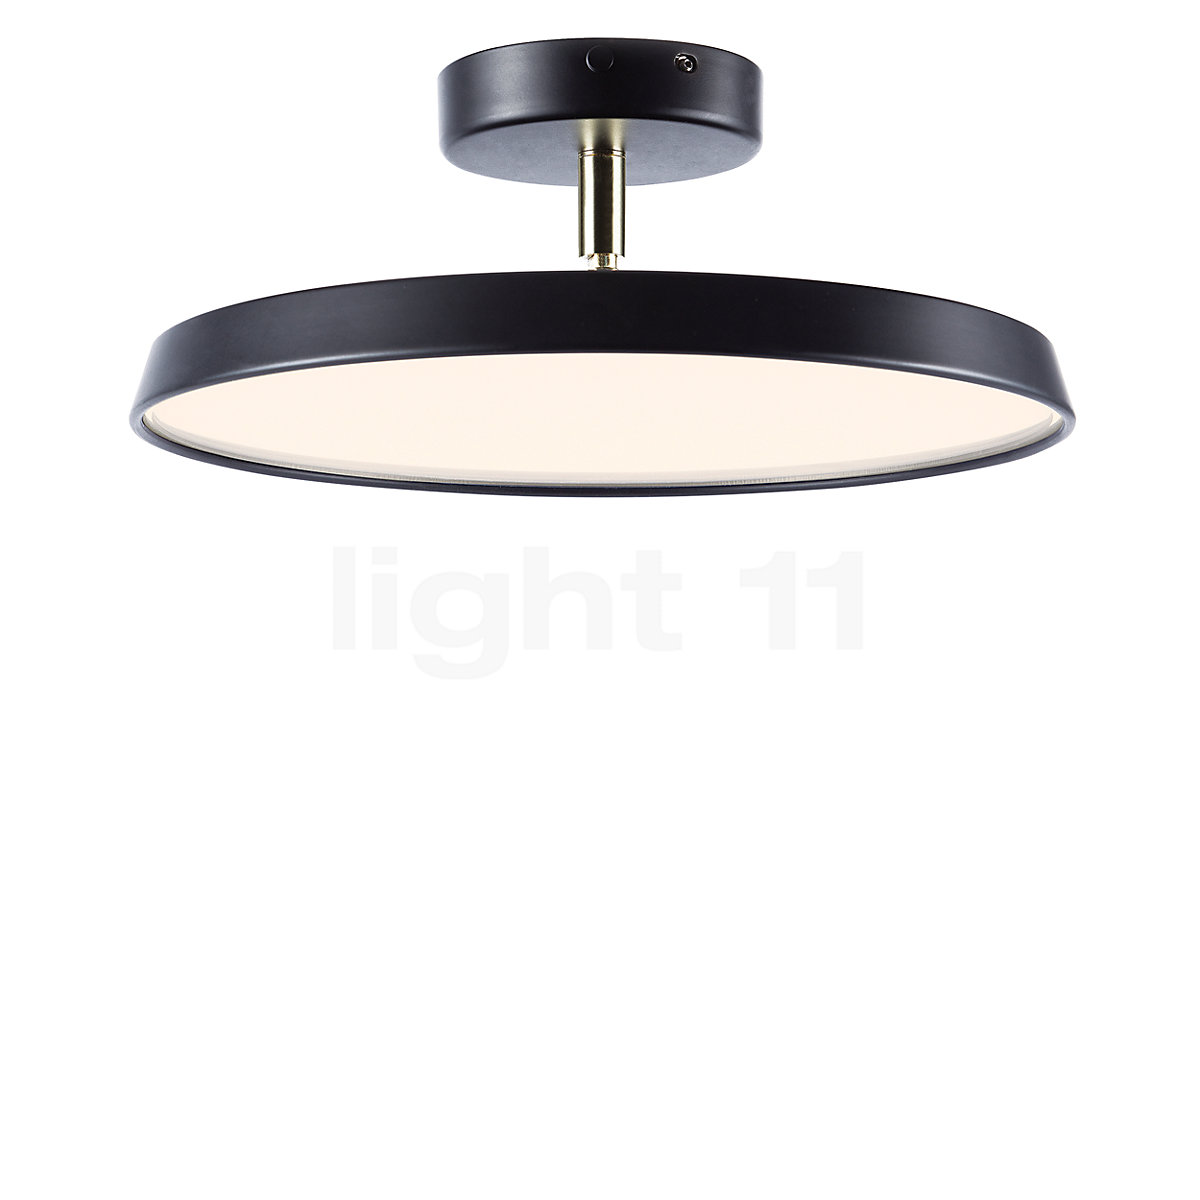 Buy Design for the Light at Kaito People LED Pro Ceiling